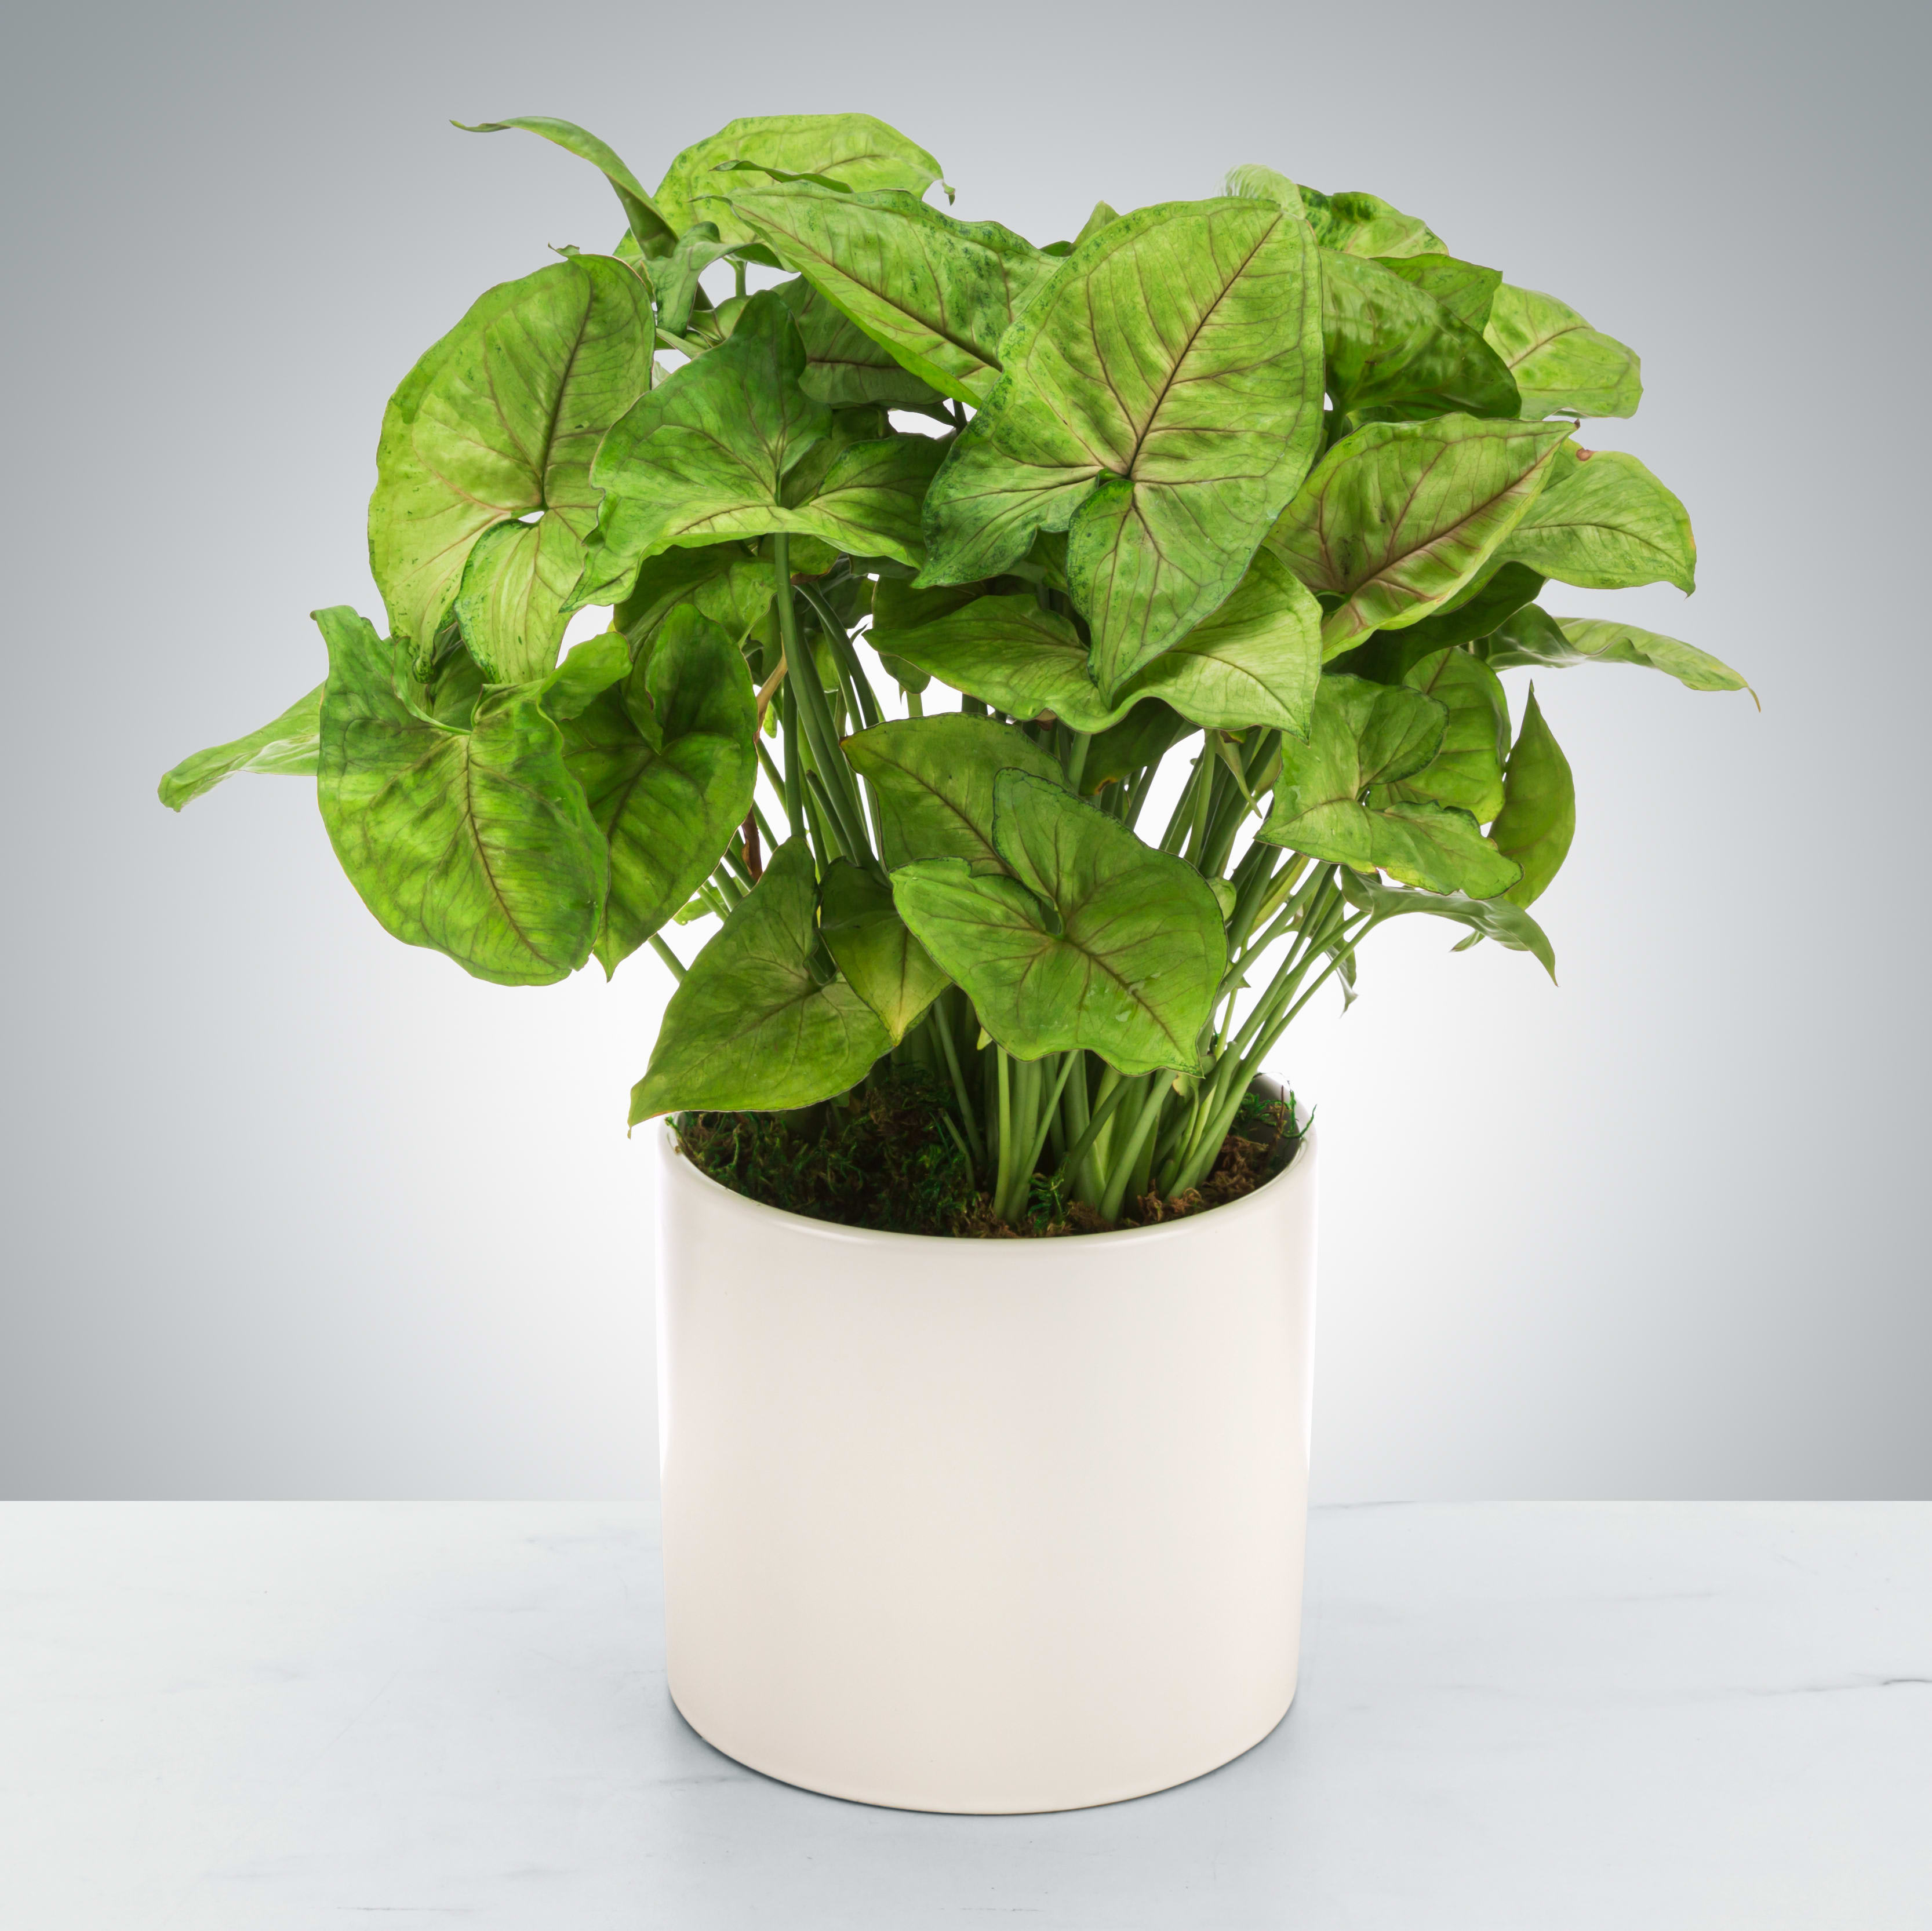 Arrowhead Plant by BloomNation™ - Also known as an arrowhead plant, these plants like low light and do not need lots of watering or attention (hooray!). Send them to the plant parent in your life for a low-maintenance addition to their collection.